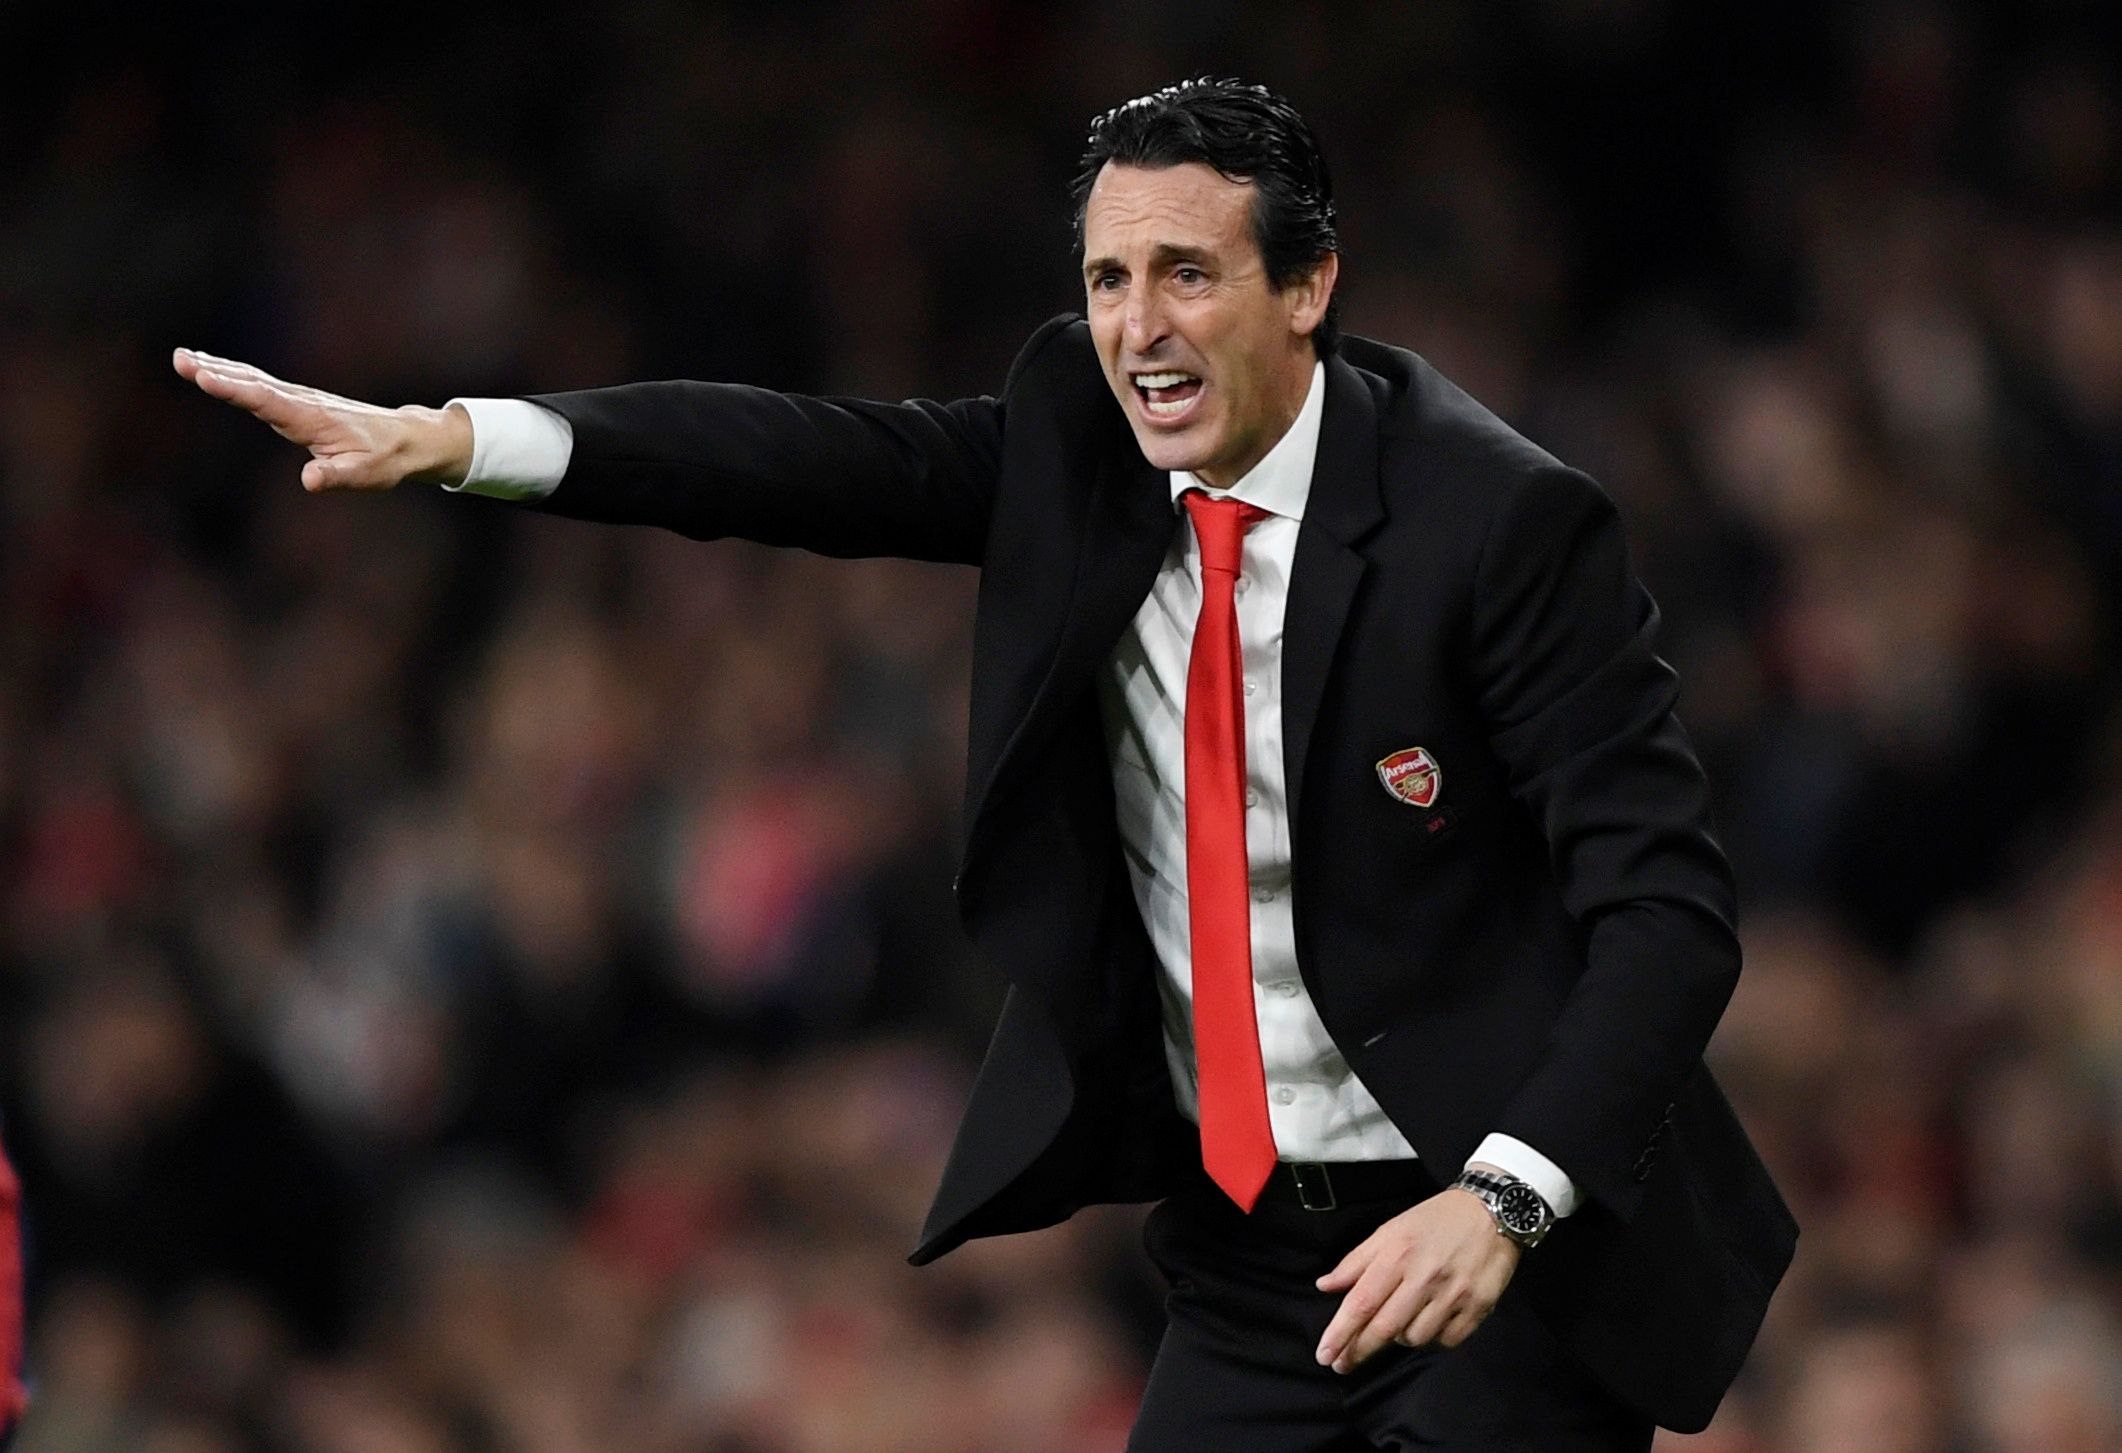 Soccer Football - Premier League - Arsenal v Crystal Palace - Emirates Stadium, London, Britain - October 27, 2019  Arsenal manager Unai Emery gestures   Action Images via Reuters/Tony O'Brien  EDITORIAL USE ONLY. No use with unauthorized audio, video, data, fixture lists, club/league logos or 